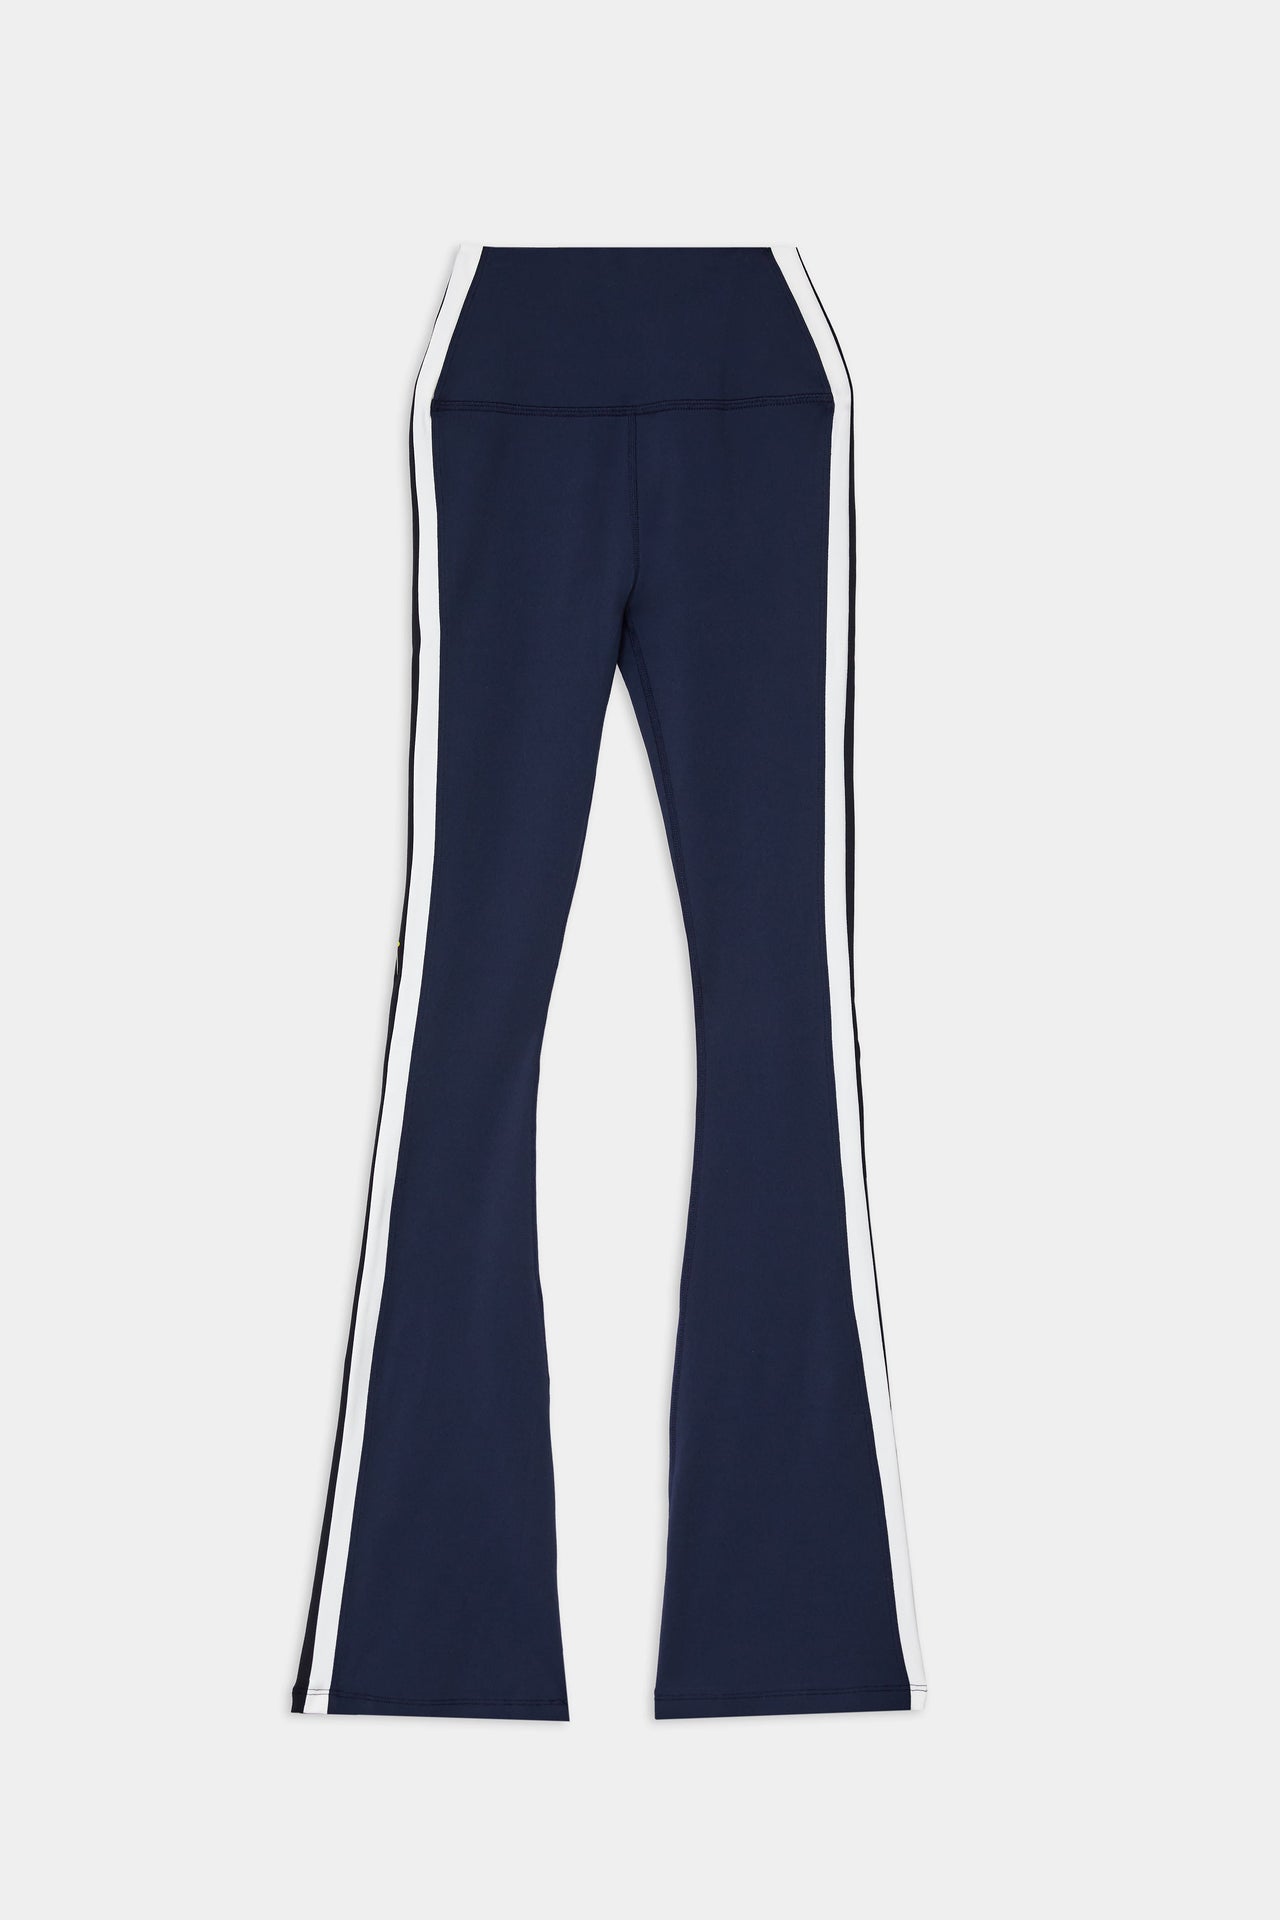 Front flat view of dark blue high waist below ankle length legging with wide flared bottoms and white and black side stripes on both legs.